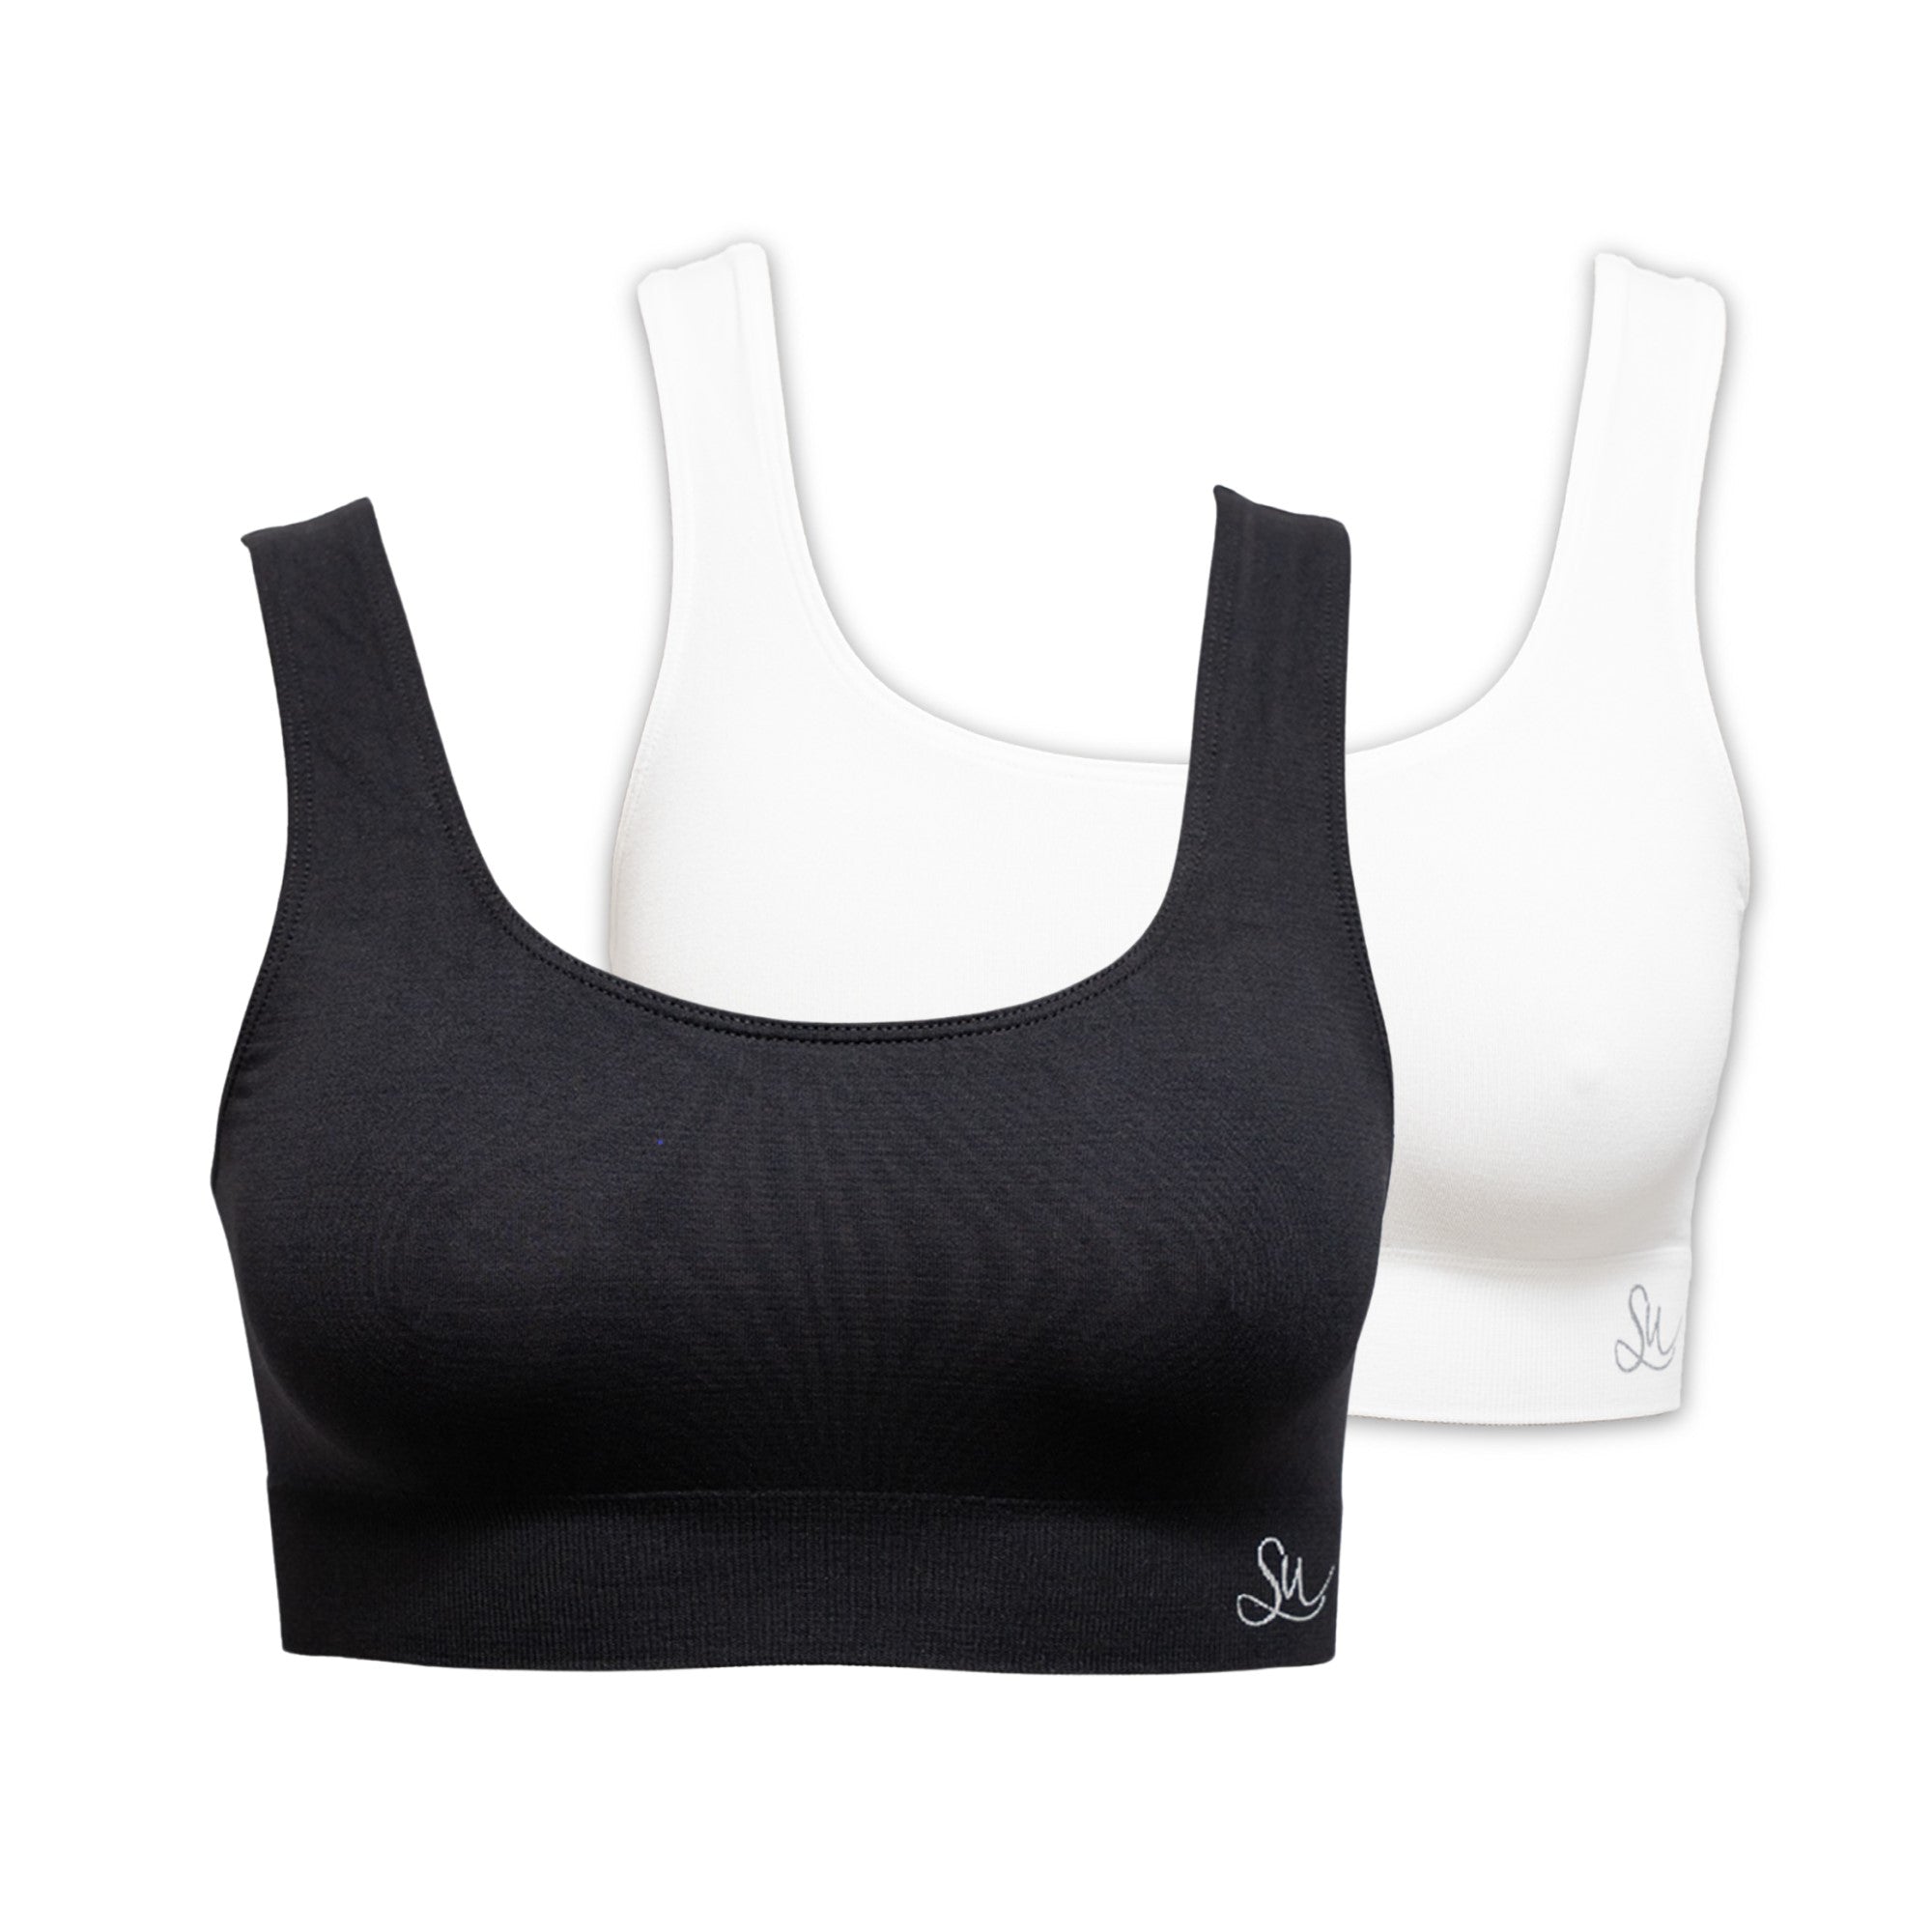 2 Pack - Seamless Crop Tops in Black and White – Seamfree Underwear